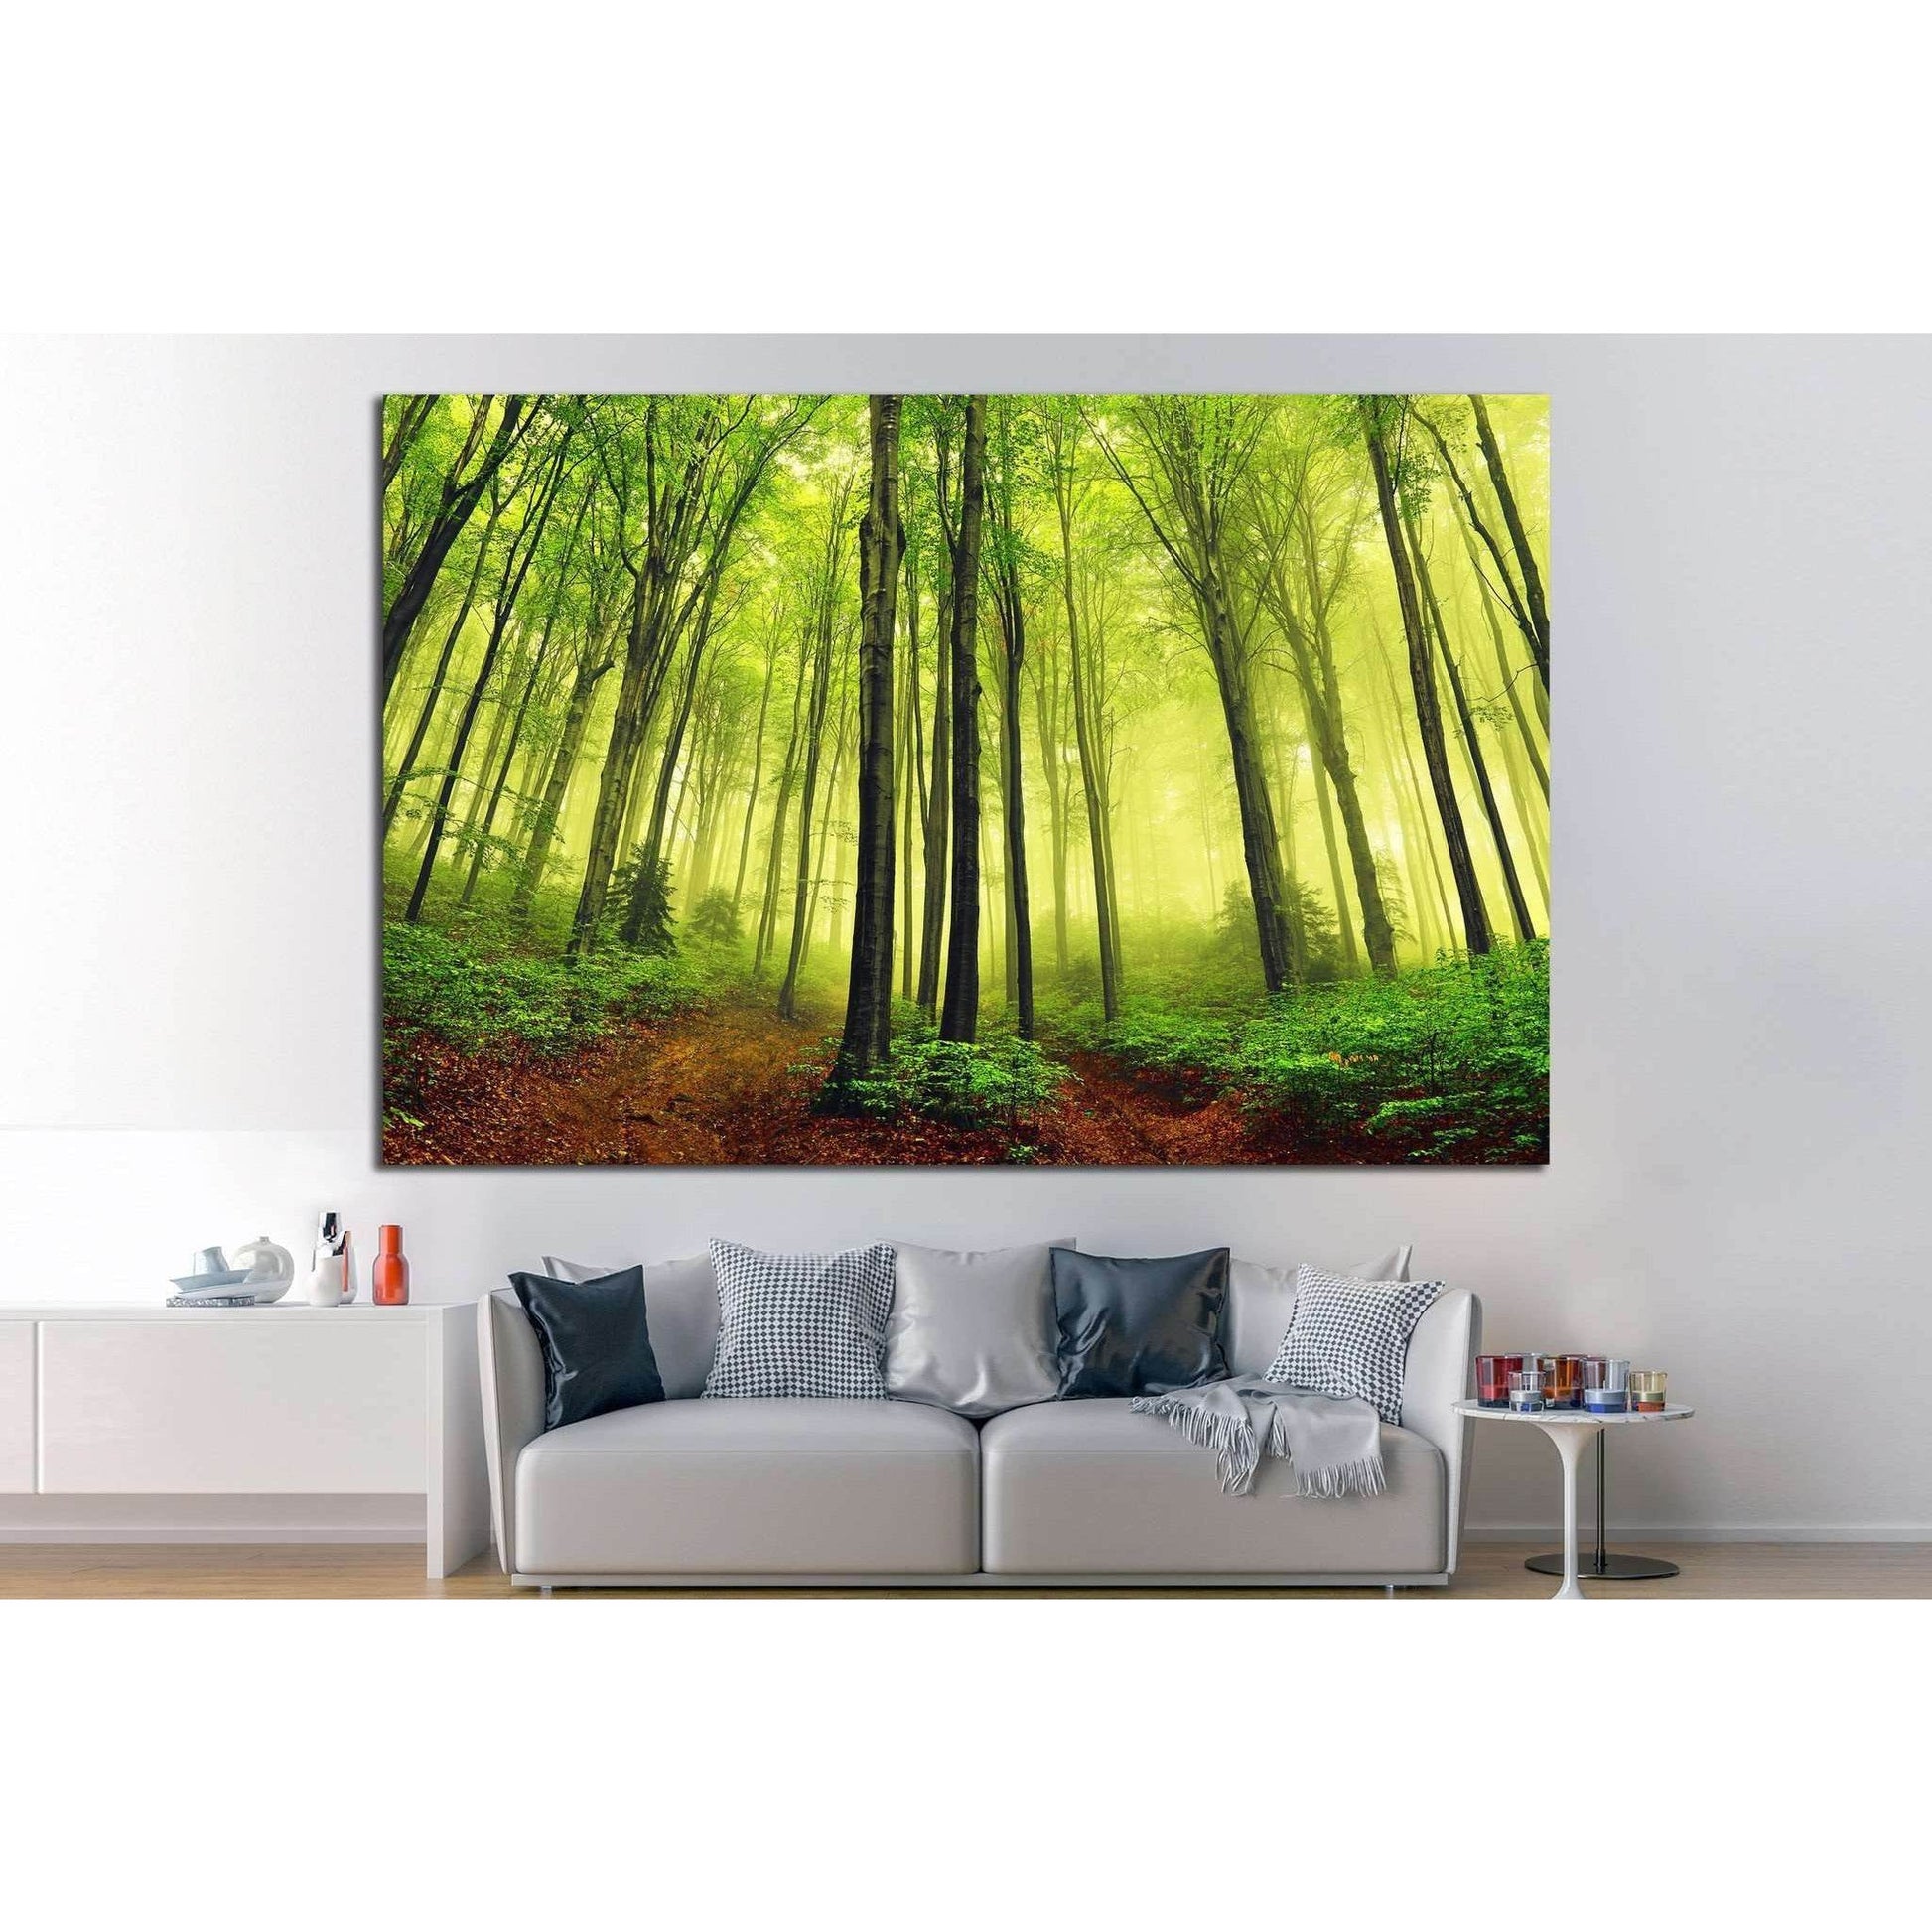 Forest Serenity Canvas Print - Peaceful Nature Wall DecorThis canvas print captures a lush forest scene bathed in a soft, diffused light, creating a peaceful and renewing atmosphere. The greenery's vivid shades and the forest's depth would complement spac